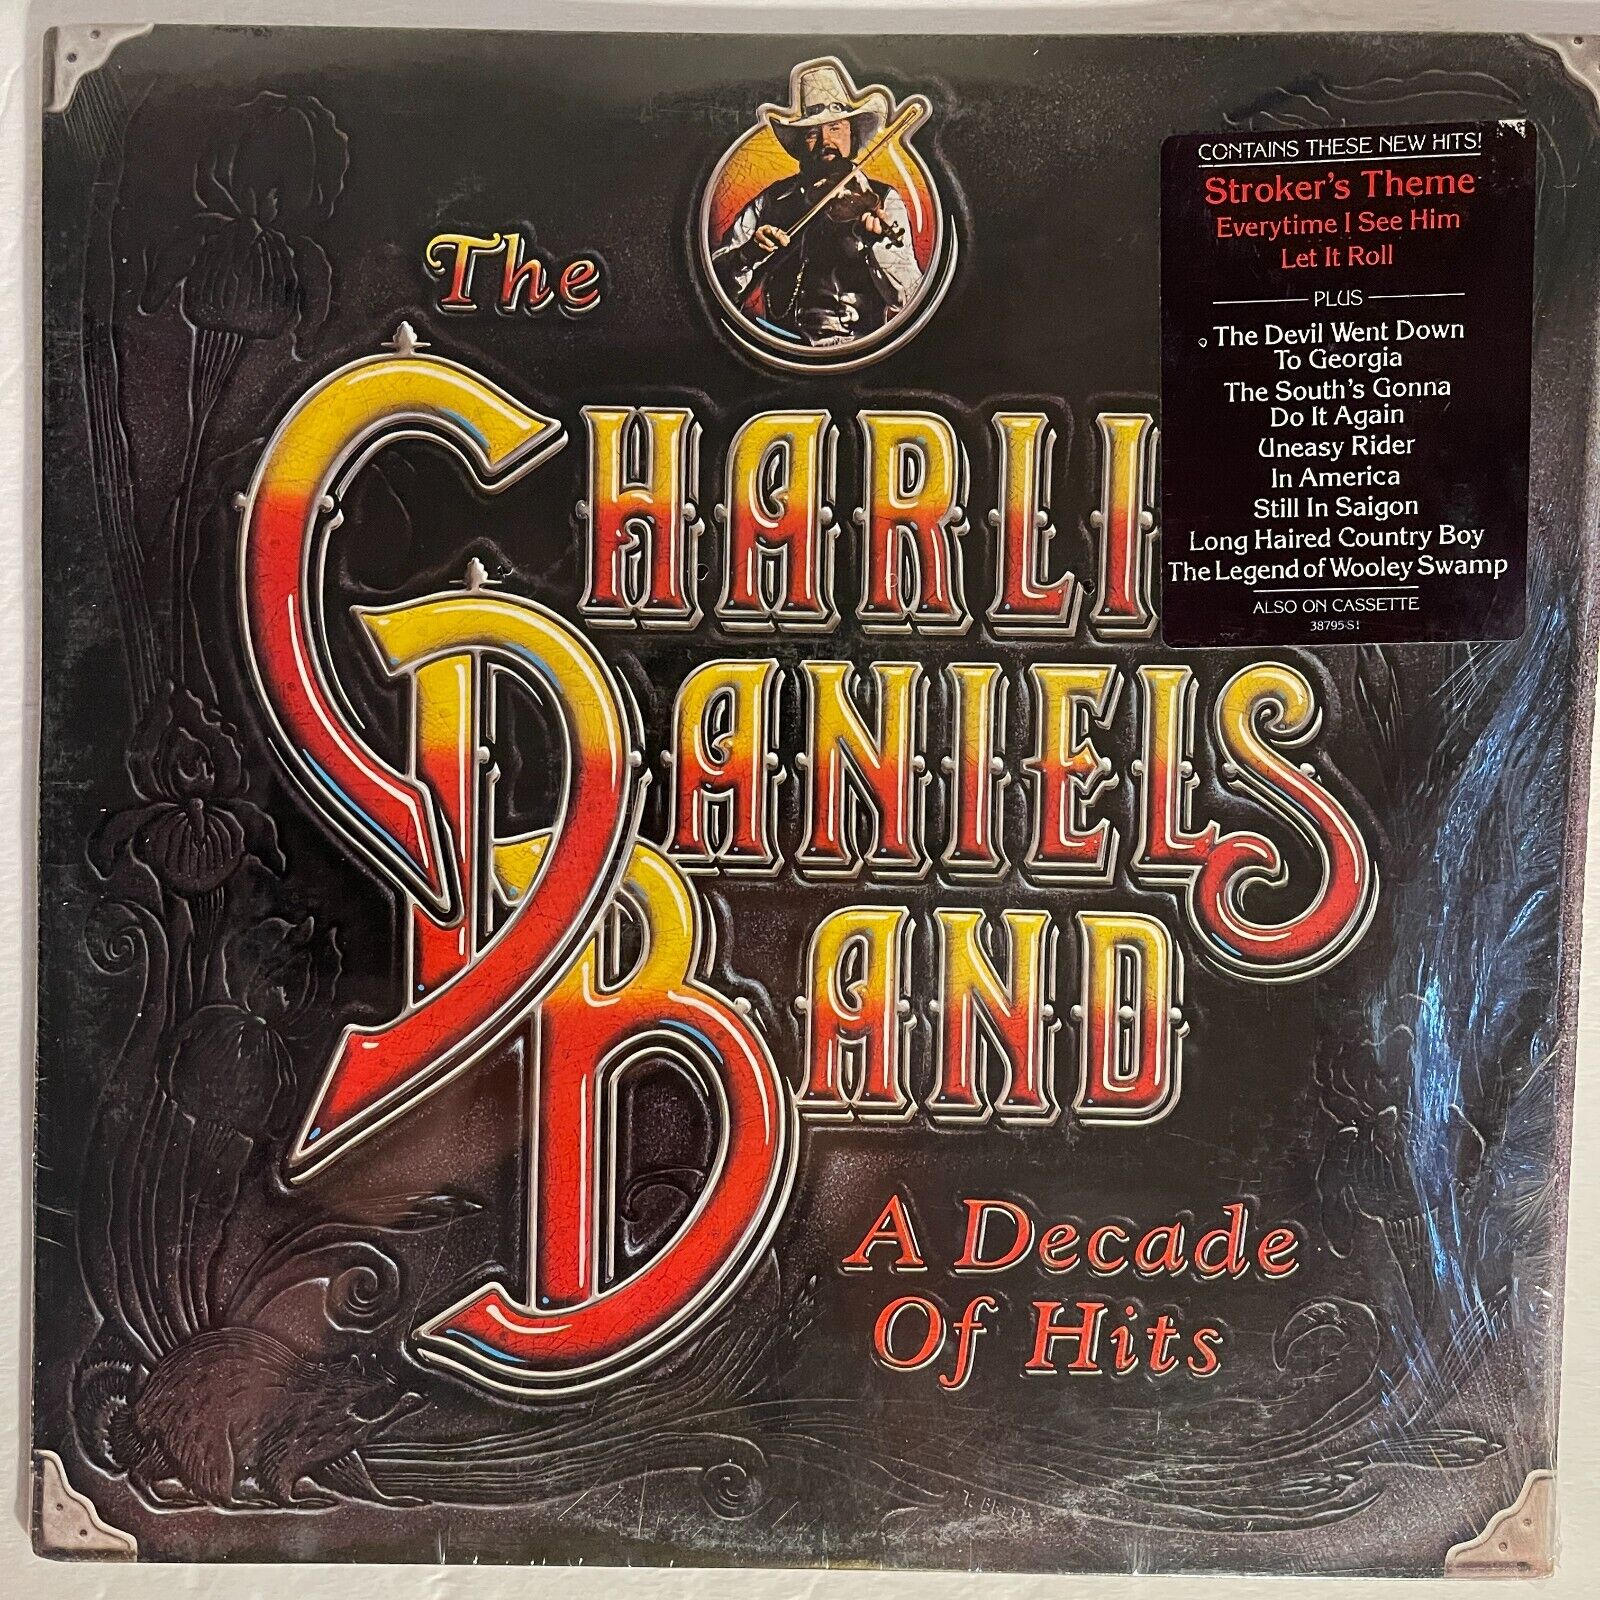 The Charlie Daniels Band ‎– A Decade Of Hits Vinyl, LP 1983 Epic ‎– FE 38795